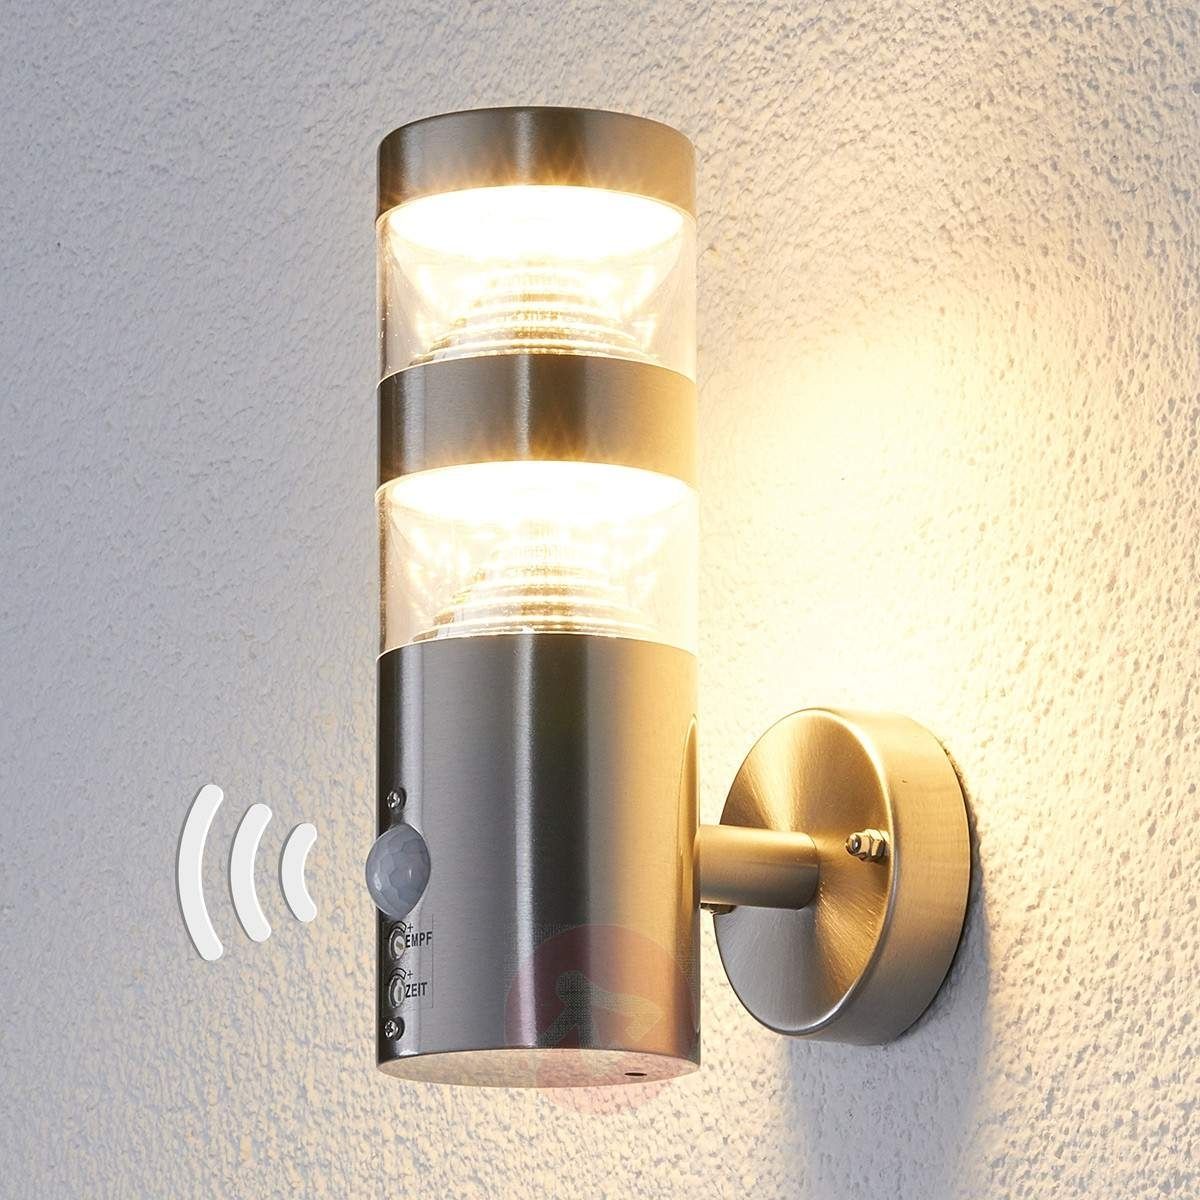 Led Outdoor Wall Light Lanea With Motion Sensor | Lights.co (View 12 of 15)